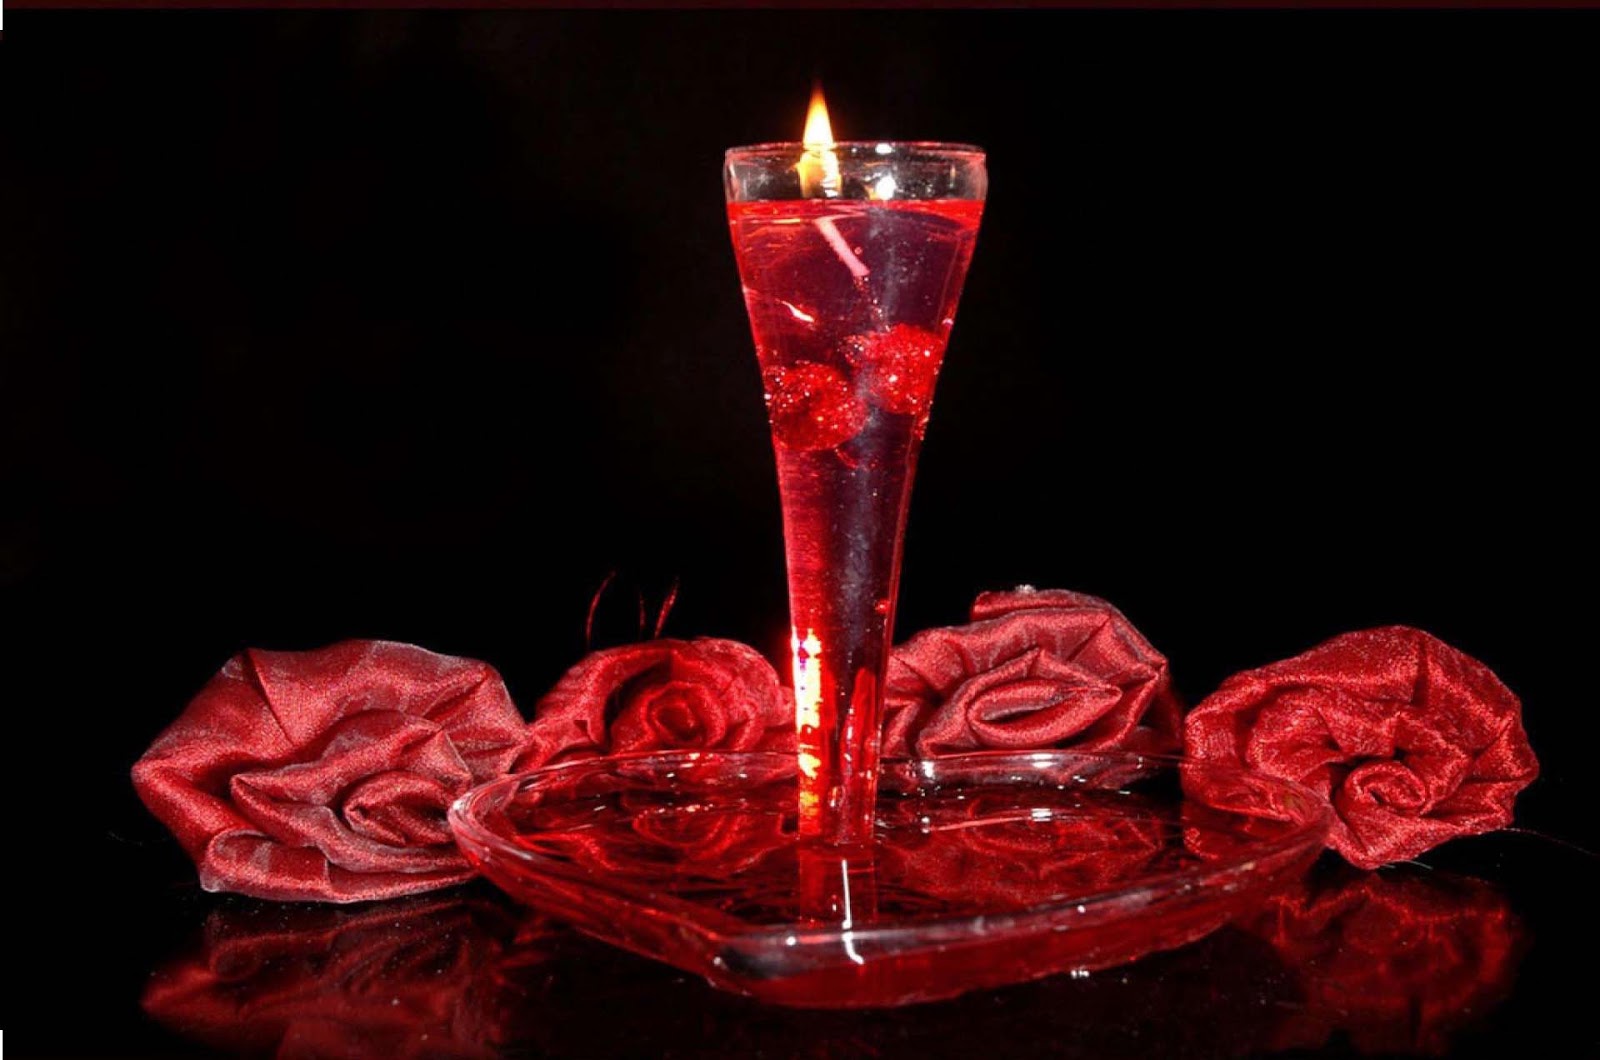 happy rose day wallpaper,red,still life photography,lighting,champagne stemware,glass